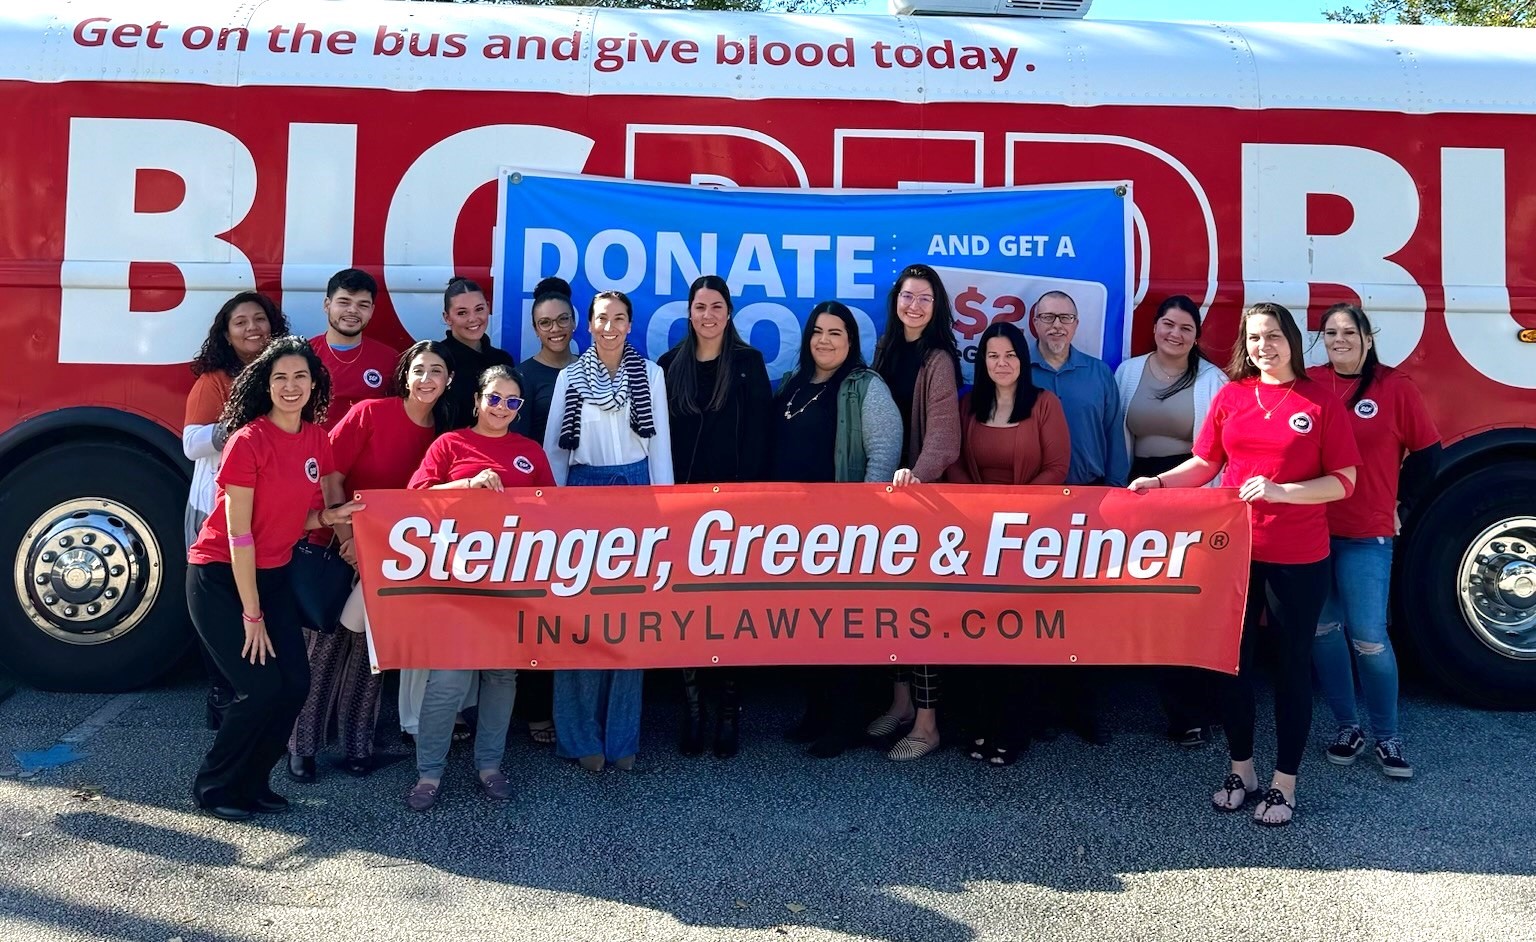 Steinger, Greene and Feiner employees in front of a One Blood Red Bus after blood drive donation for the community